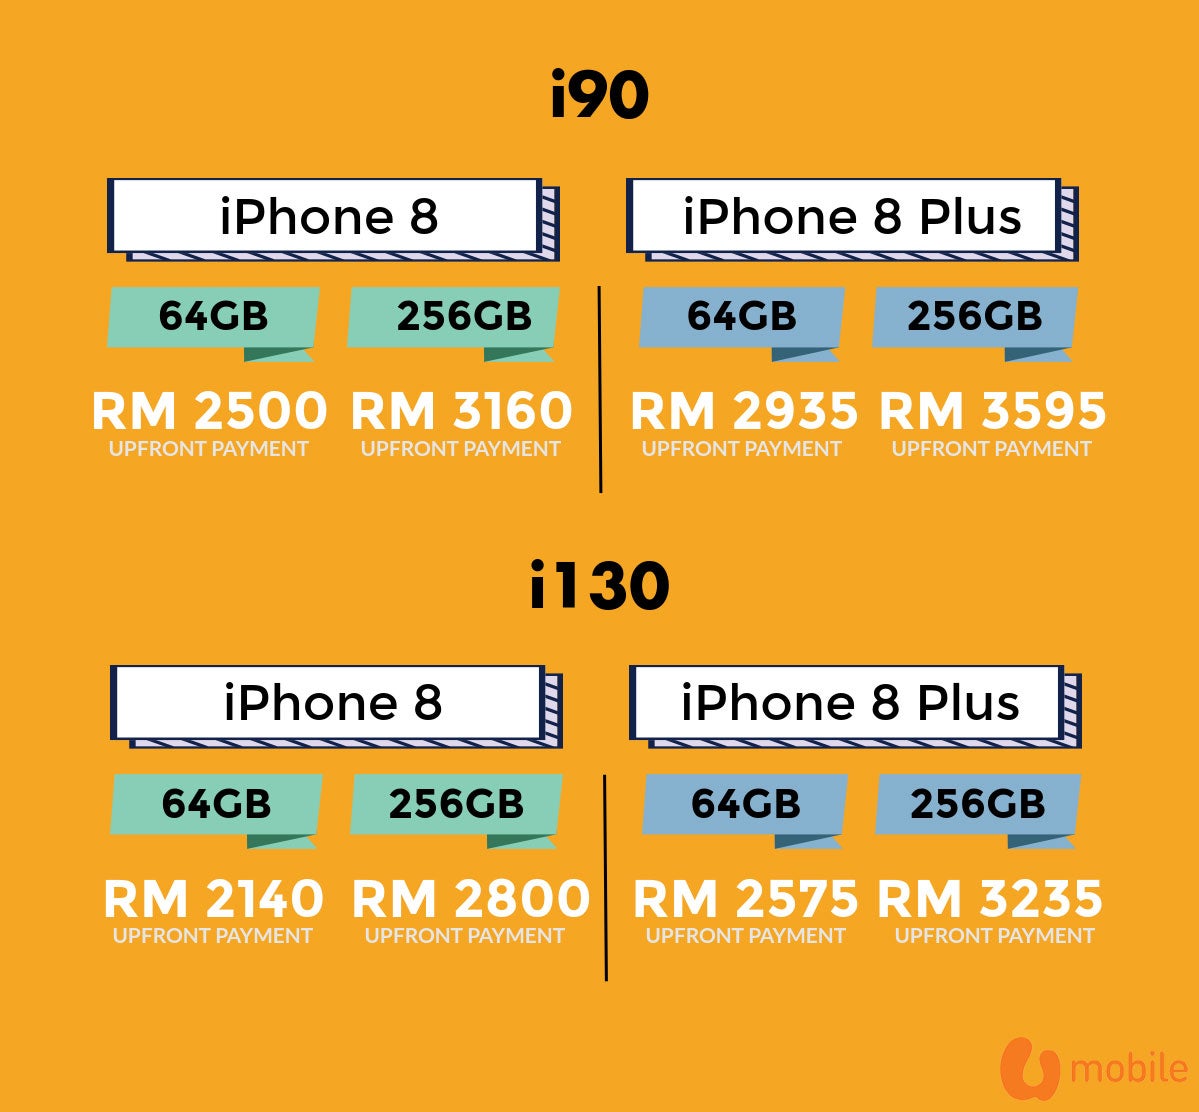 [TEST] Broke But Want the New iPhone 8? Here's How Malaysians Can Get It For Just RM217 a Month! - WORLD OF BUZZ 2